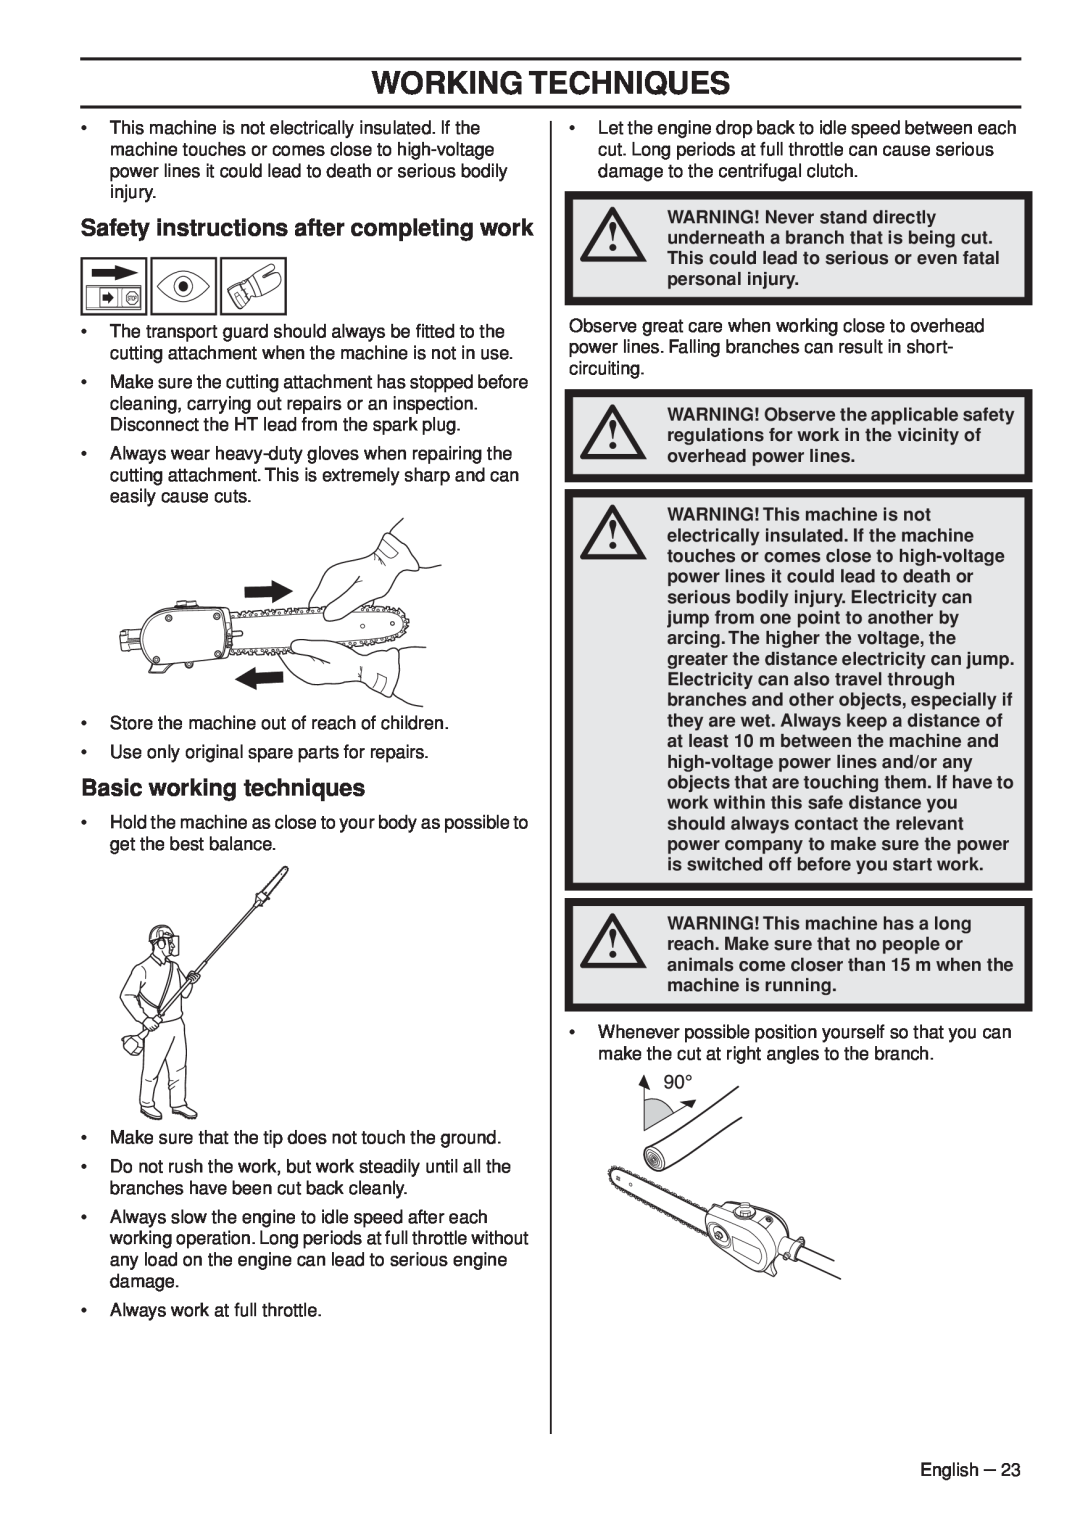 Husqvarna 966976701 Safety instructions after completing work, Basic working techniques, WARNING! Never stand directly 